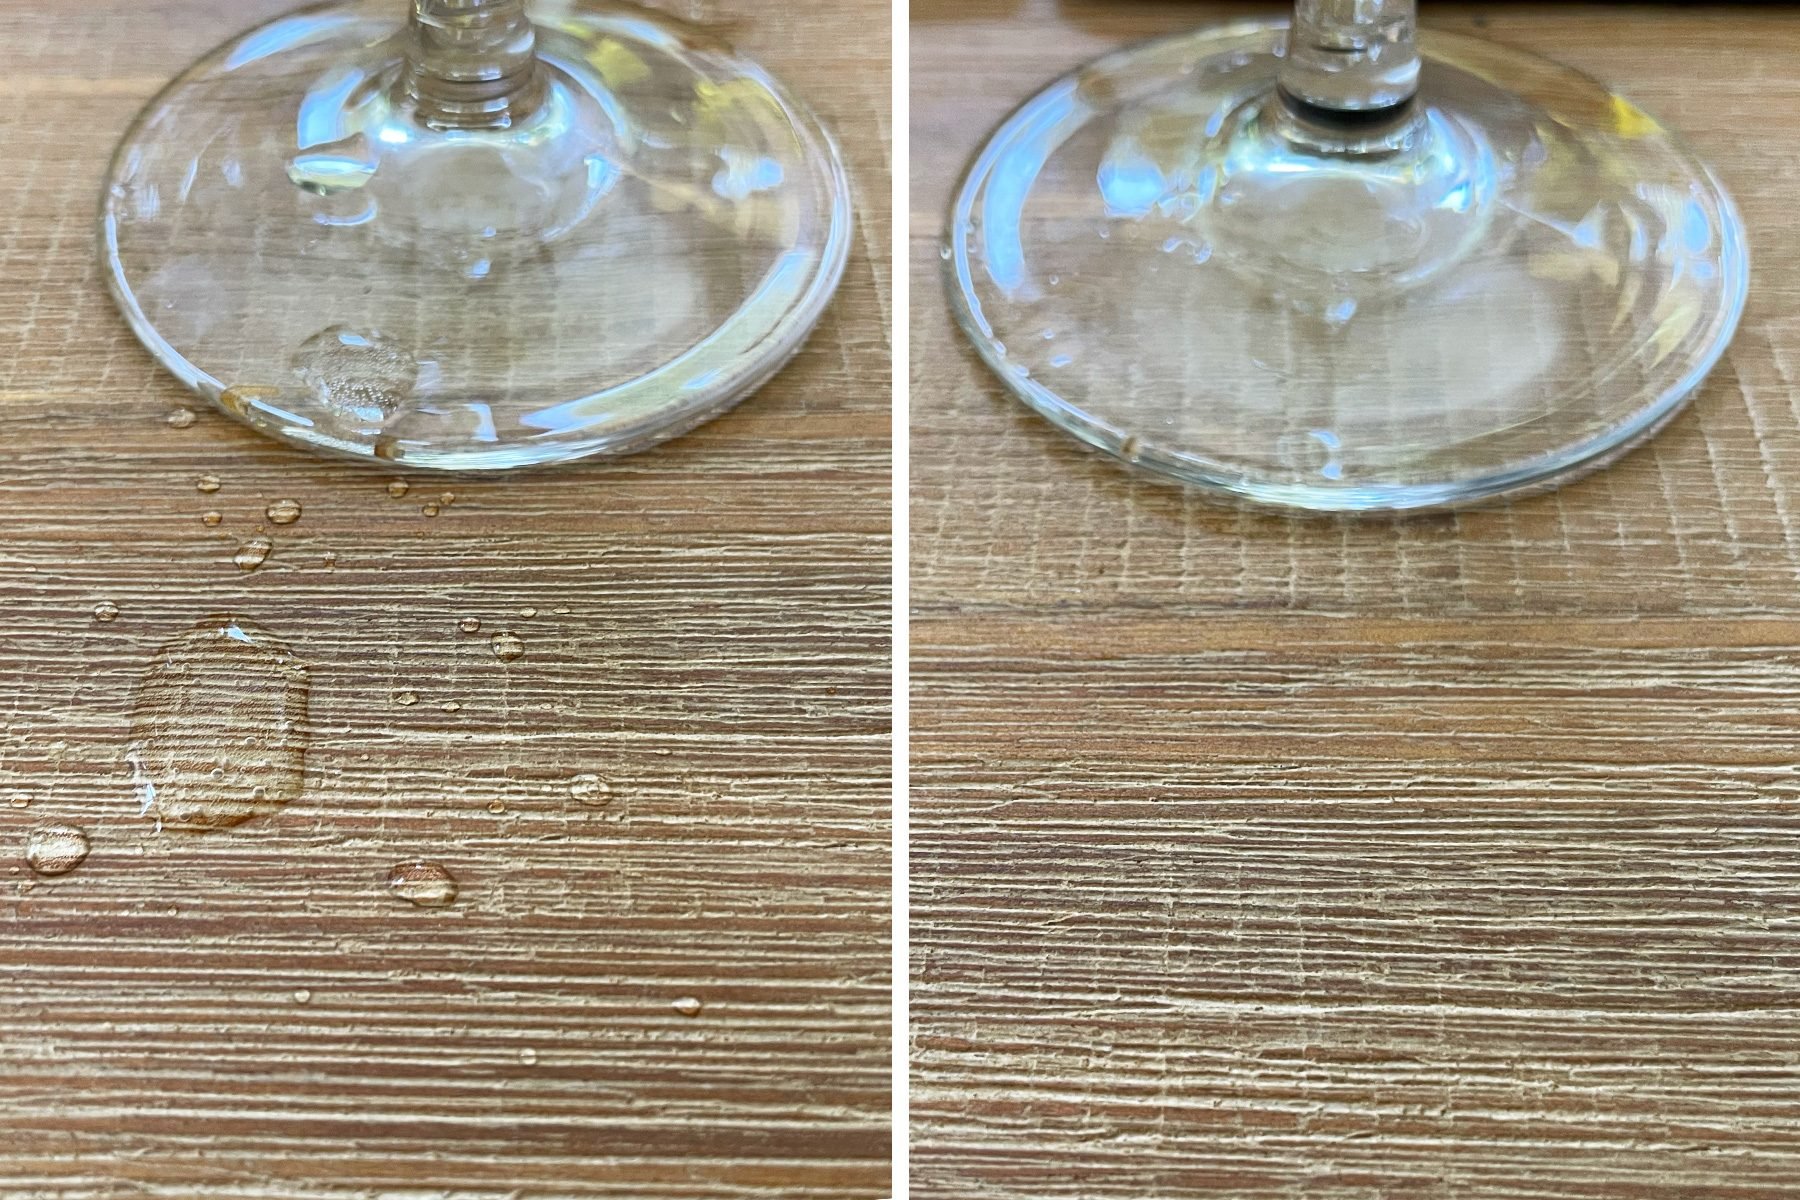 Before and After of water spill on table 